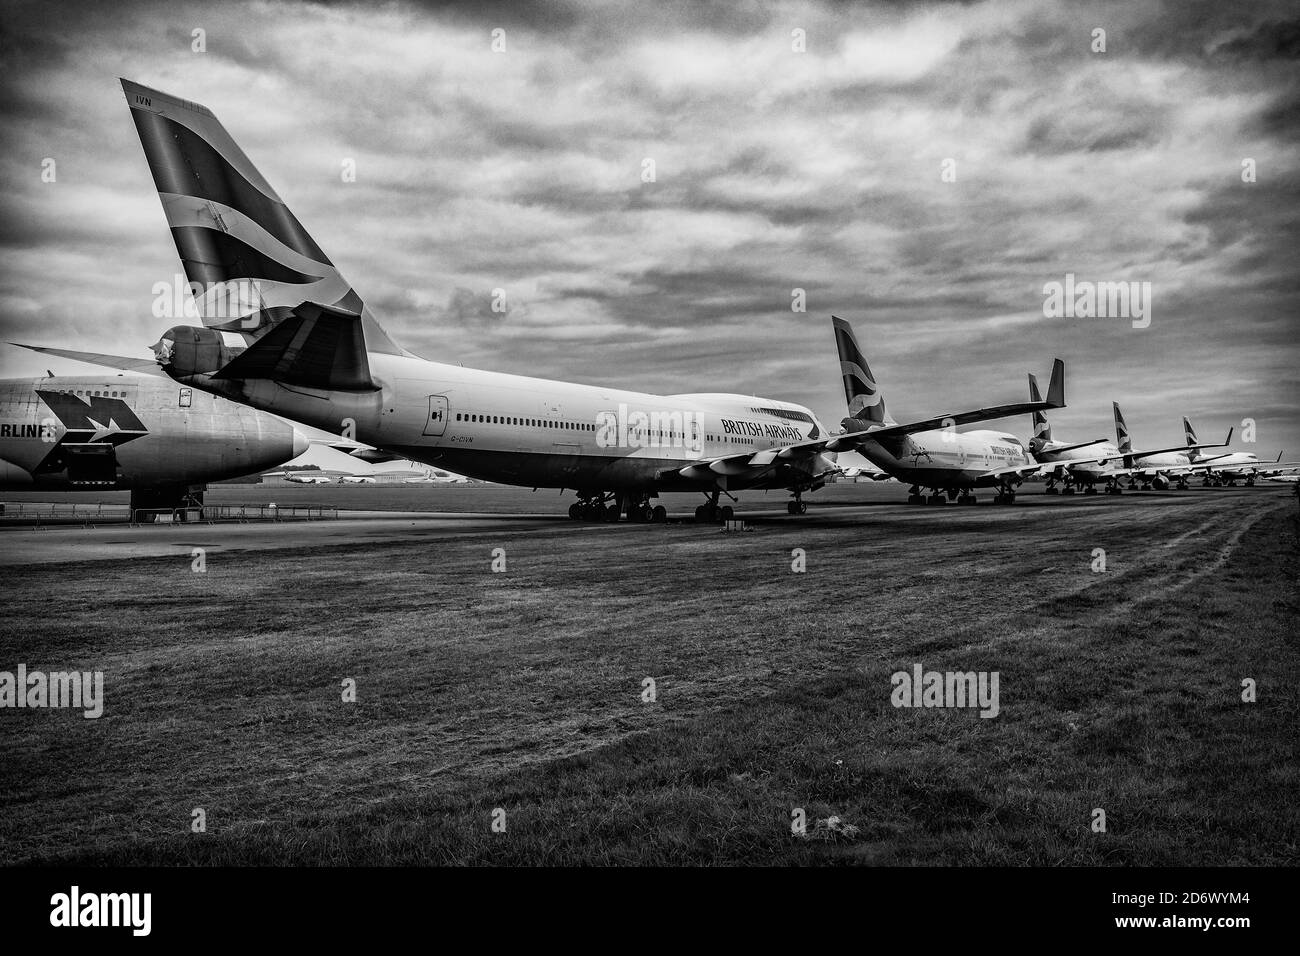 British Airways Boeing 747 Jumbo Jets Being Recycled At Cotswold Airport Near Kemble In The Cotswolds . Stock Photo